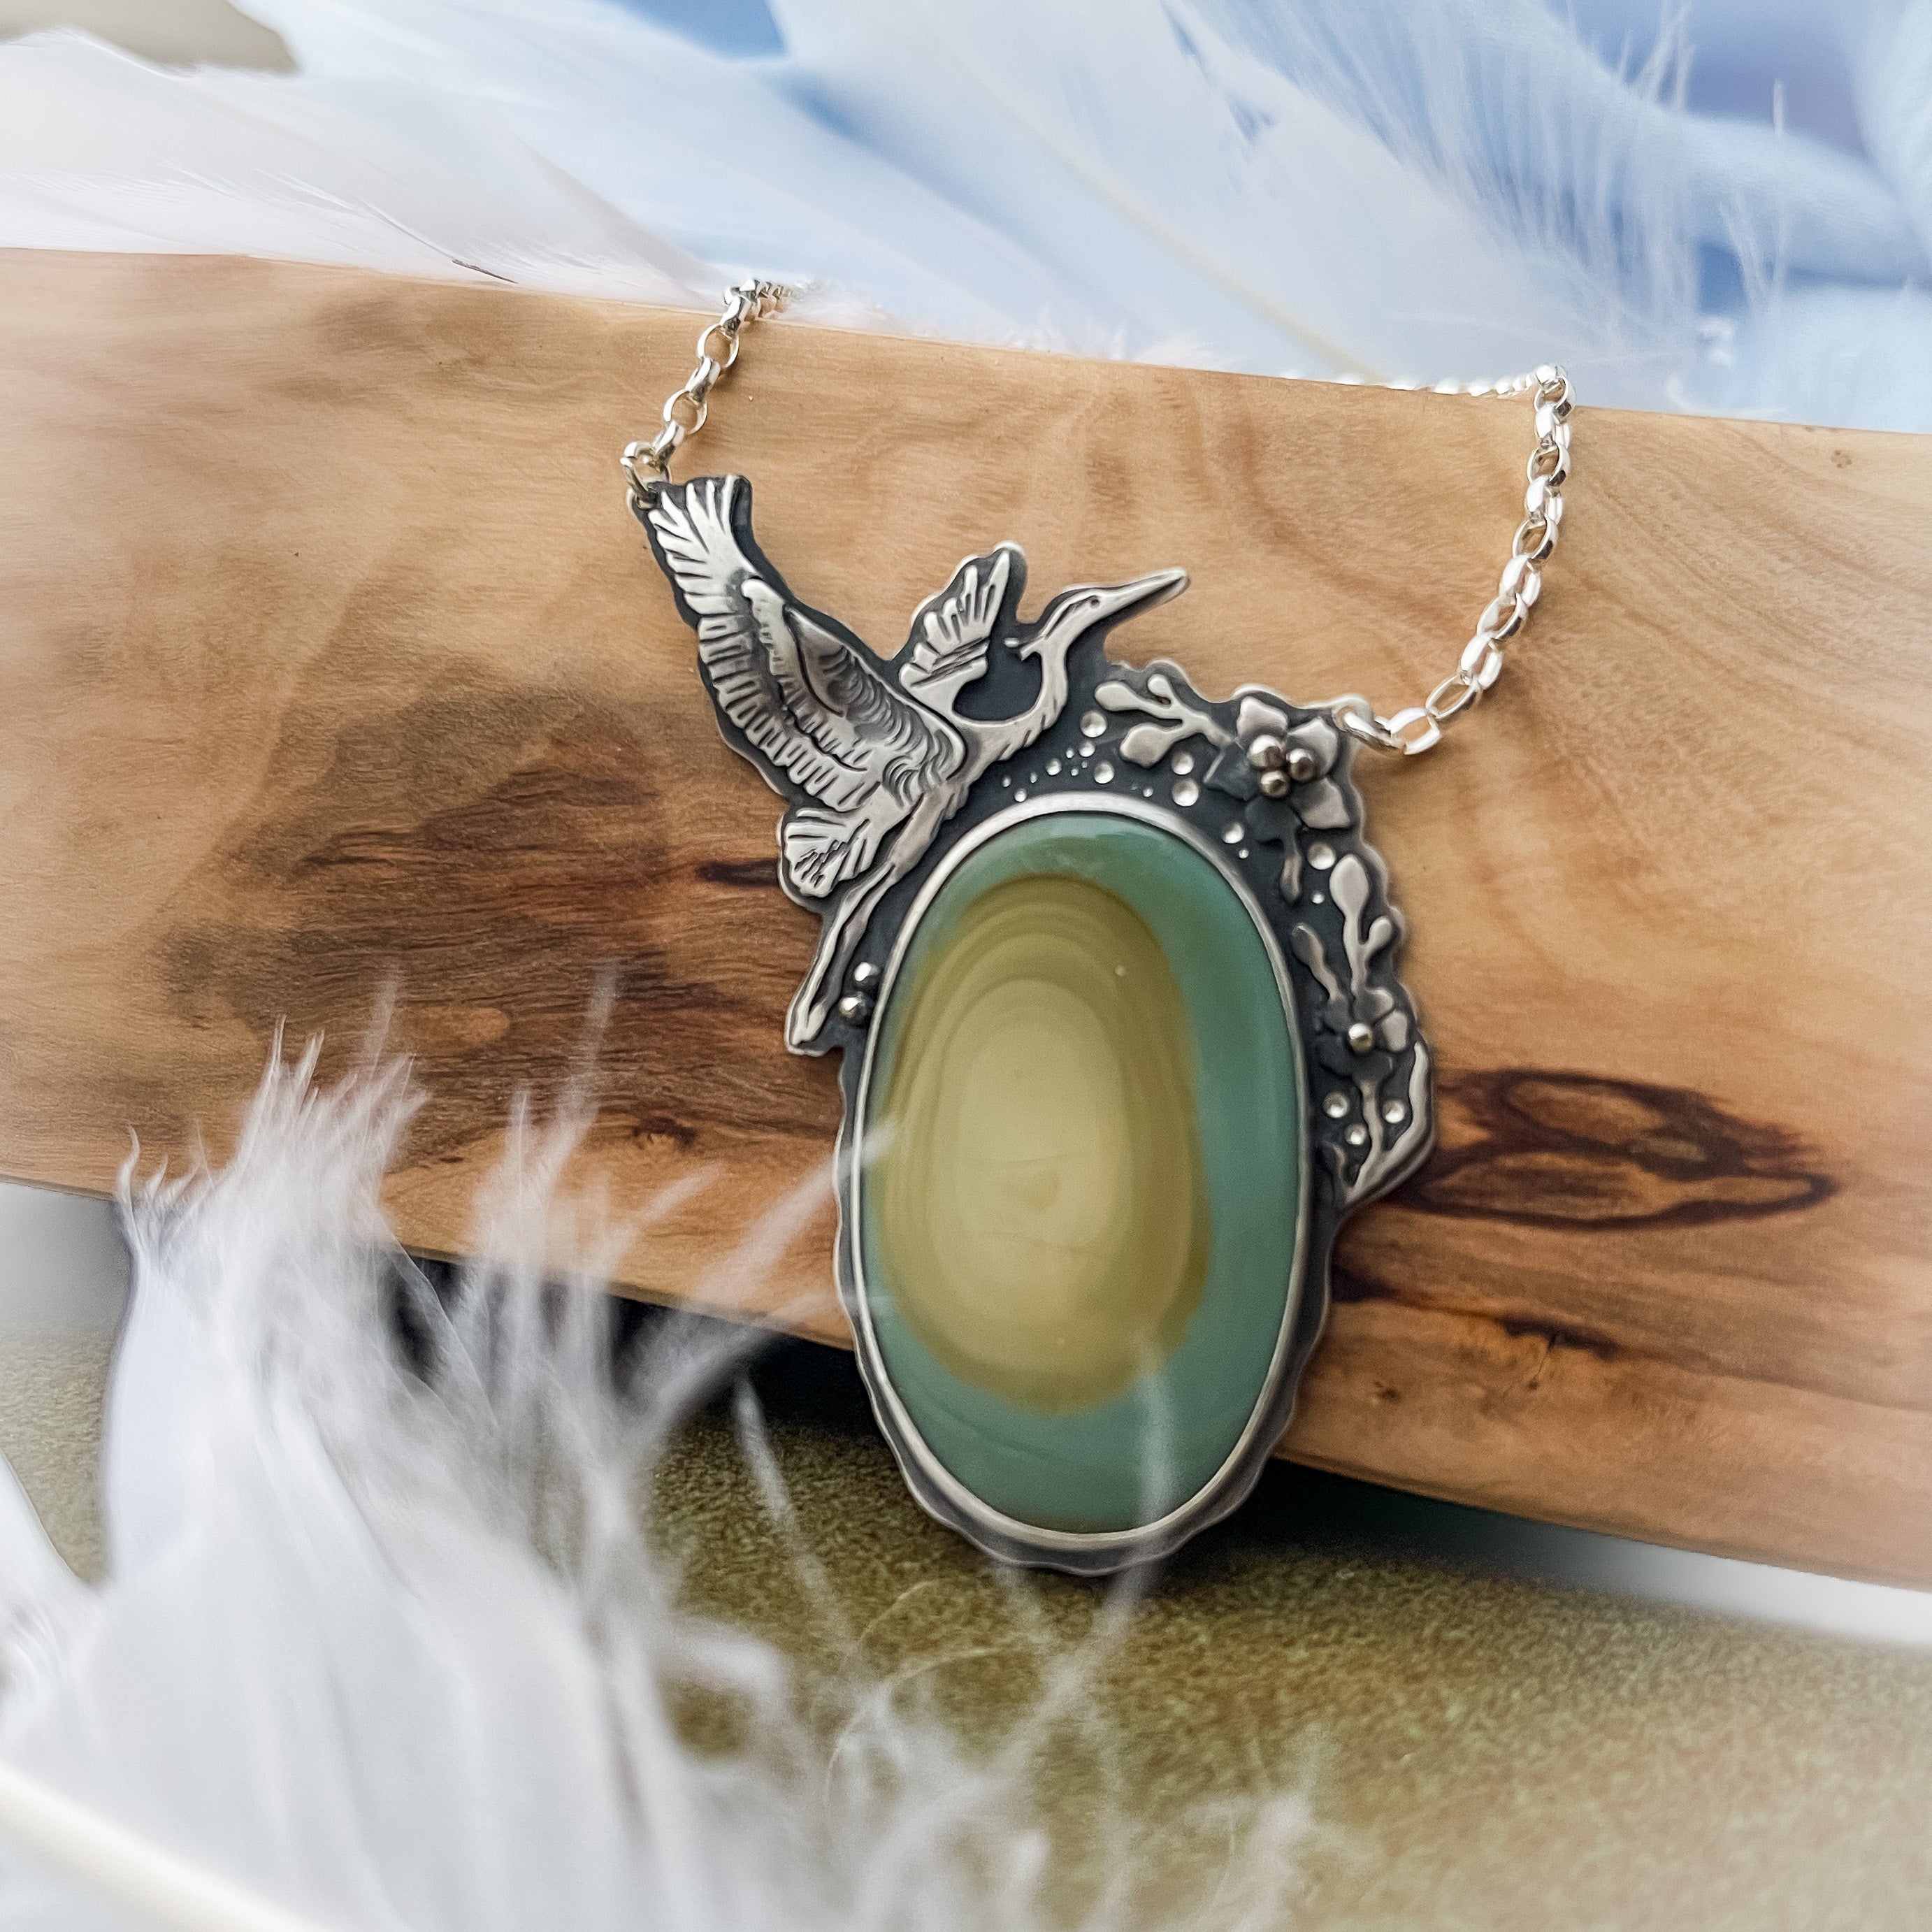 The Spring Heron Necklace I